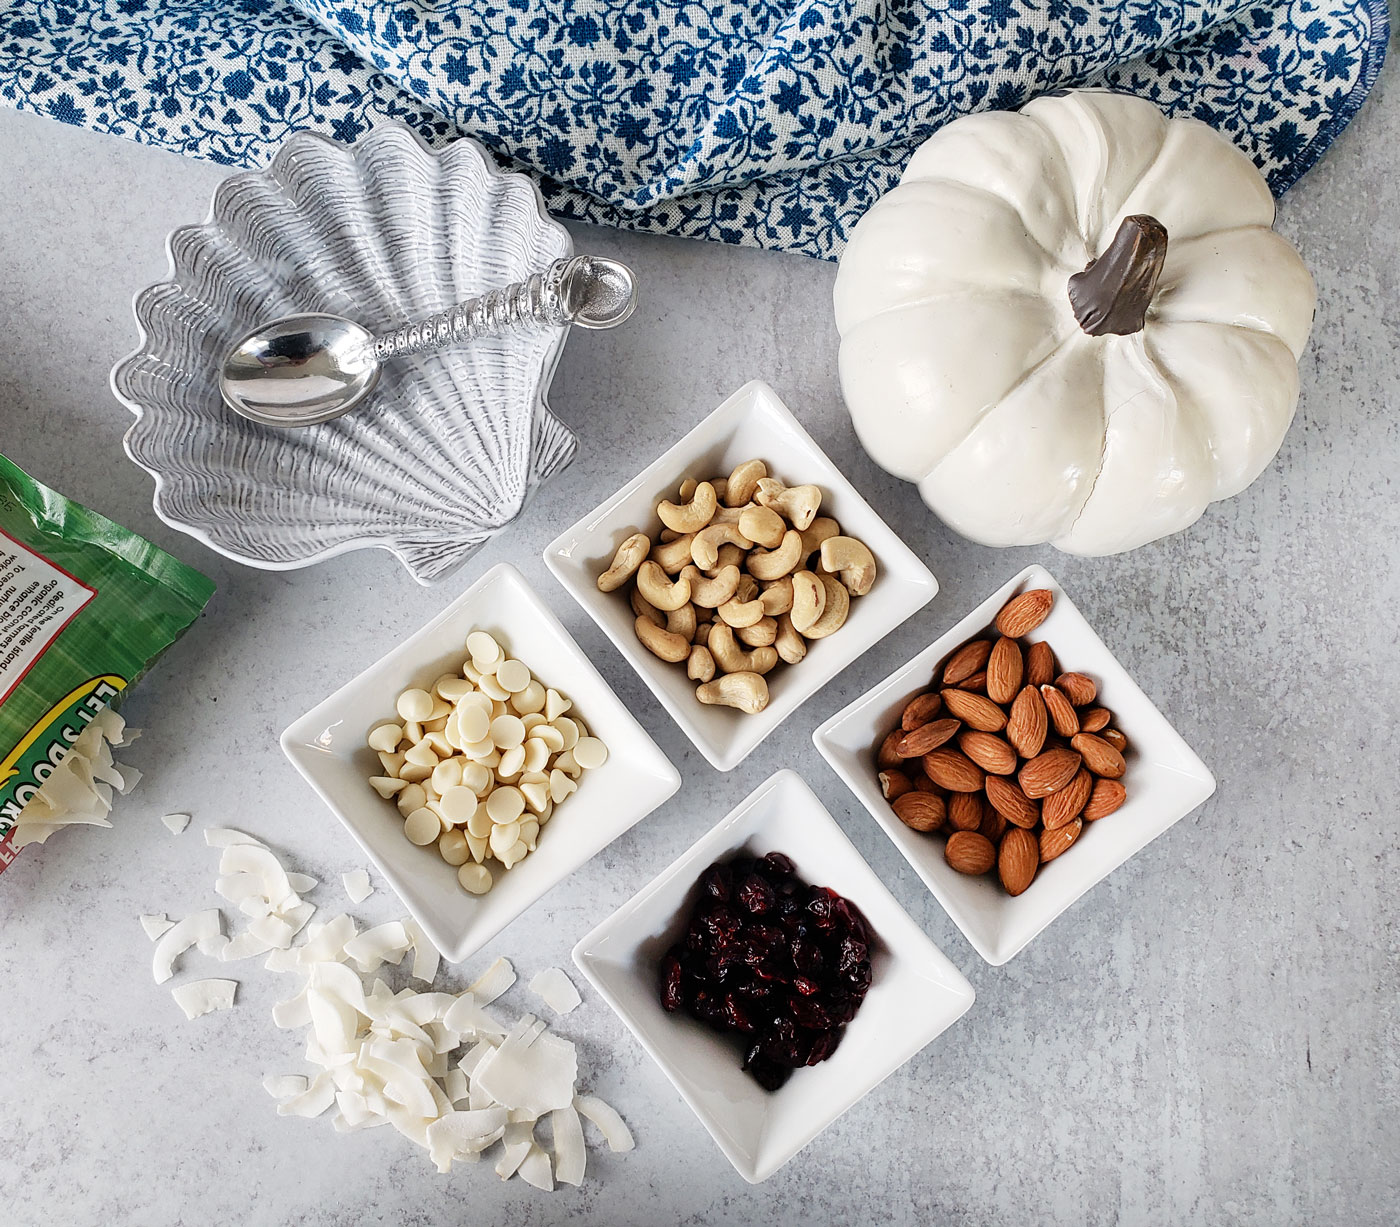 Healthy fall party mix ingredients, white chocolate chips, dried cranberries, almonds, cashews, coconut flakes